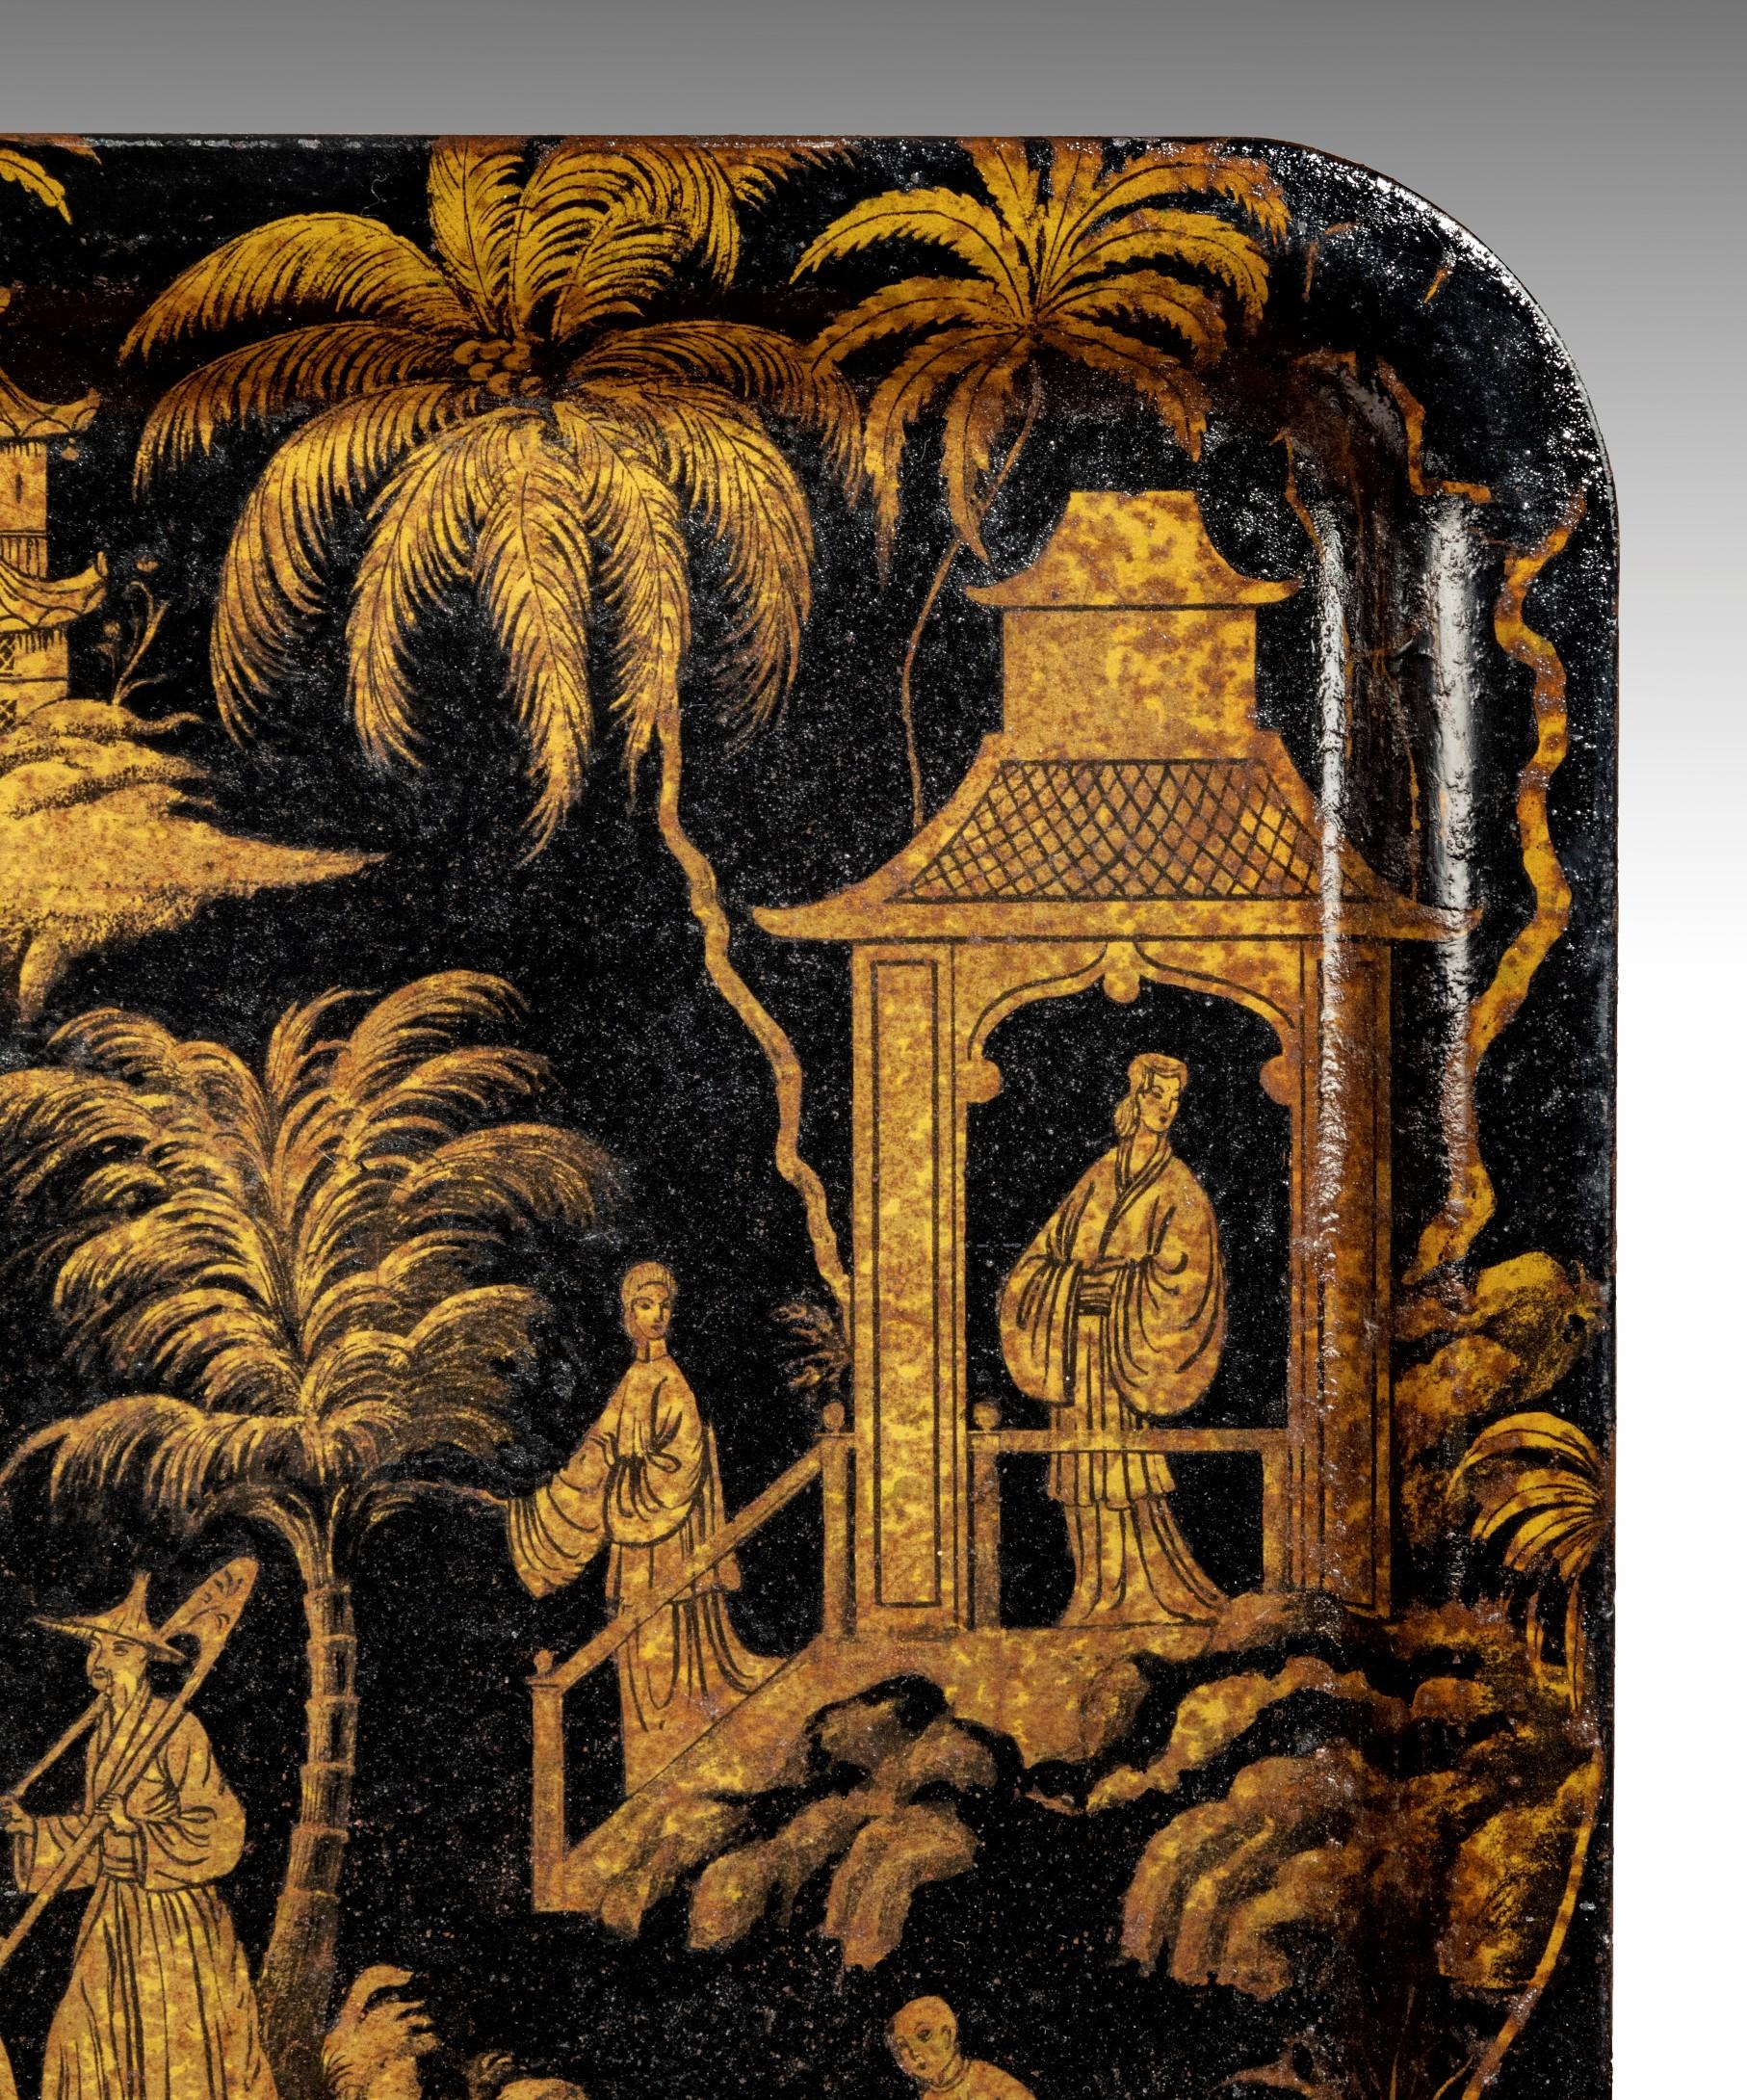 A highly decorative Regency period chinoiserie tray decorated in black and gold toleware (painted tin). The front of the tray is covered in mythical Chinese landscapes with pagodas, palm trees, a bridge and various figures.